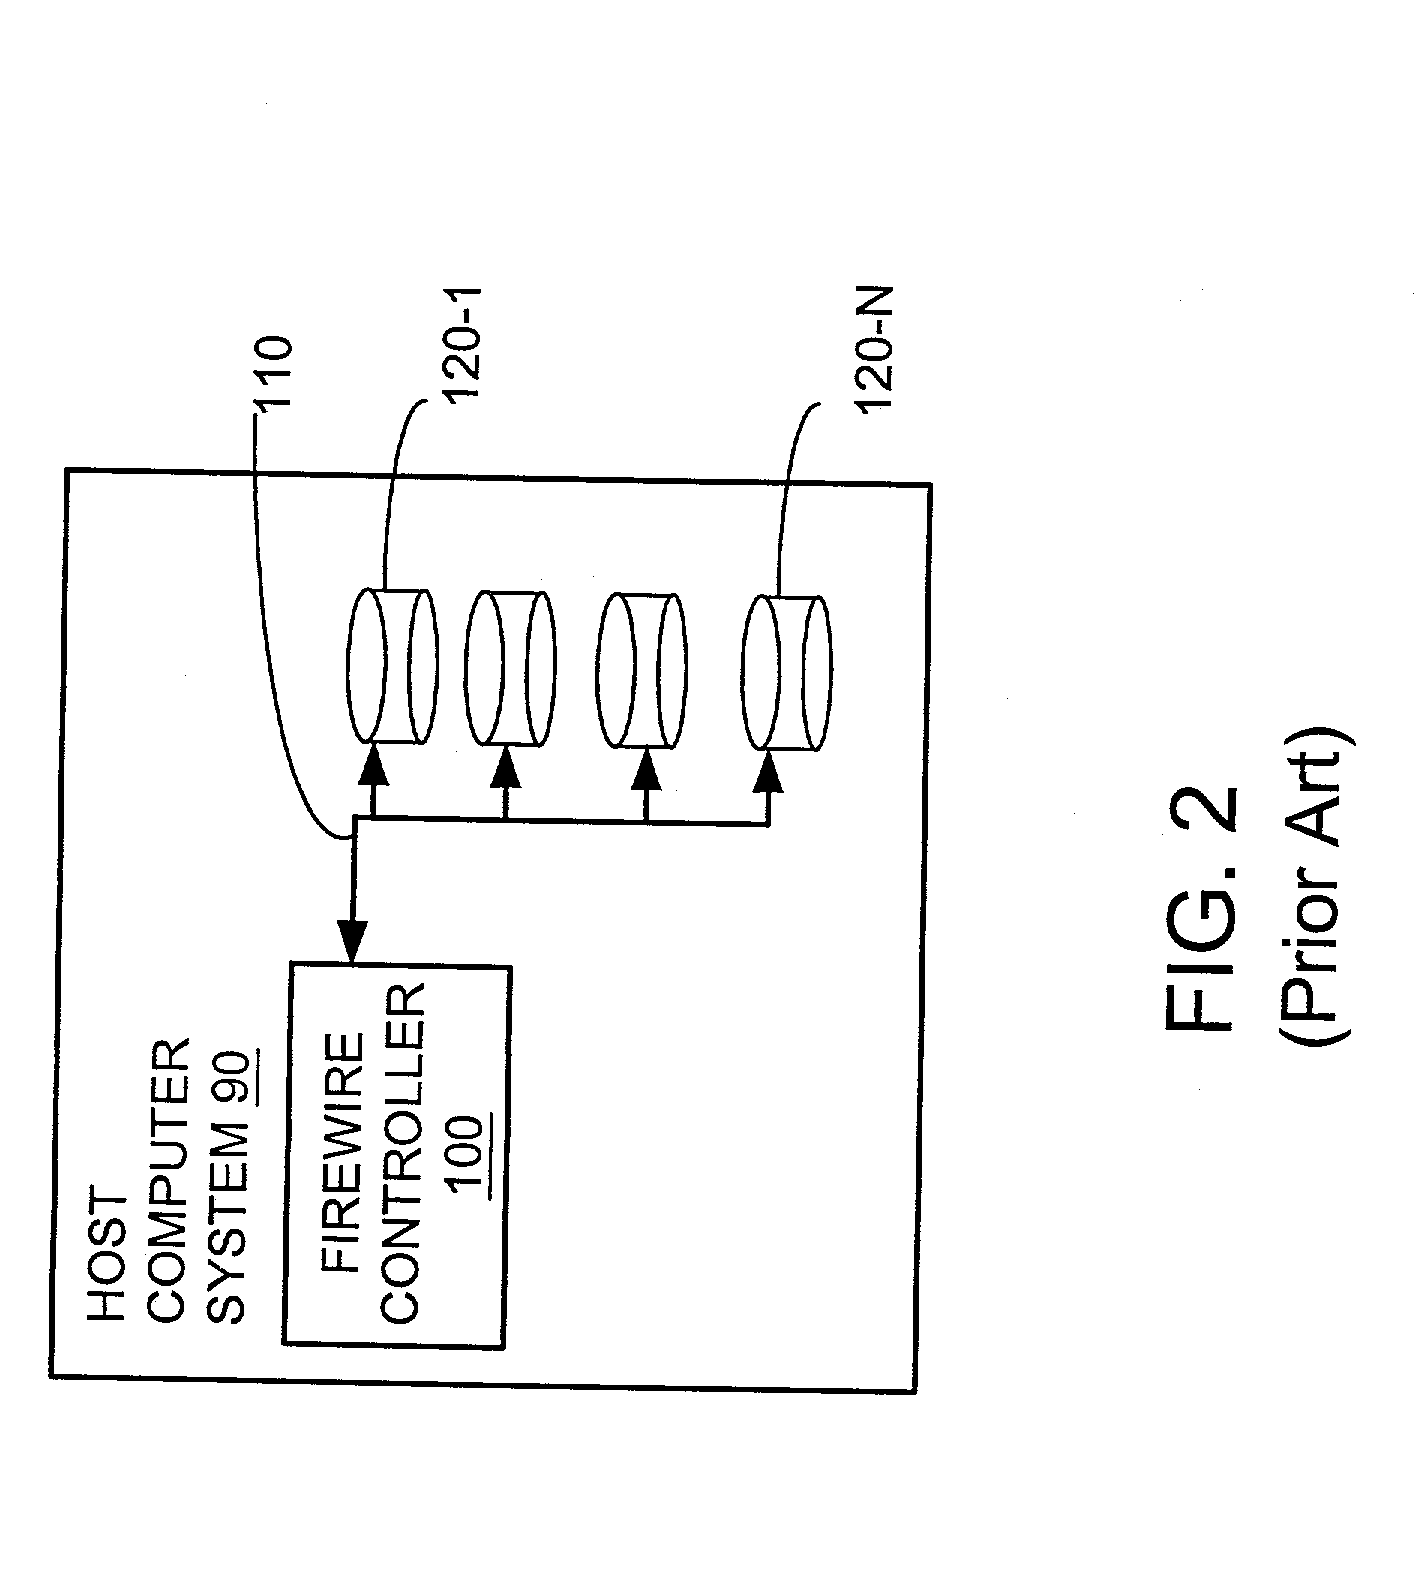 Method and apparatus for a controller capable of supporting multiple protocols